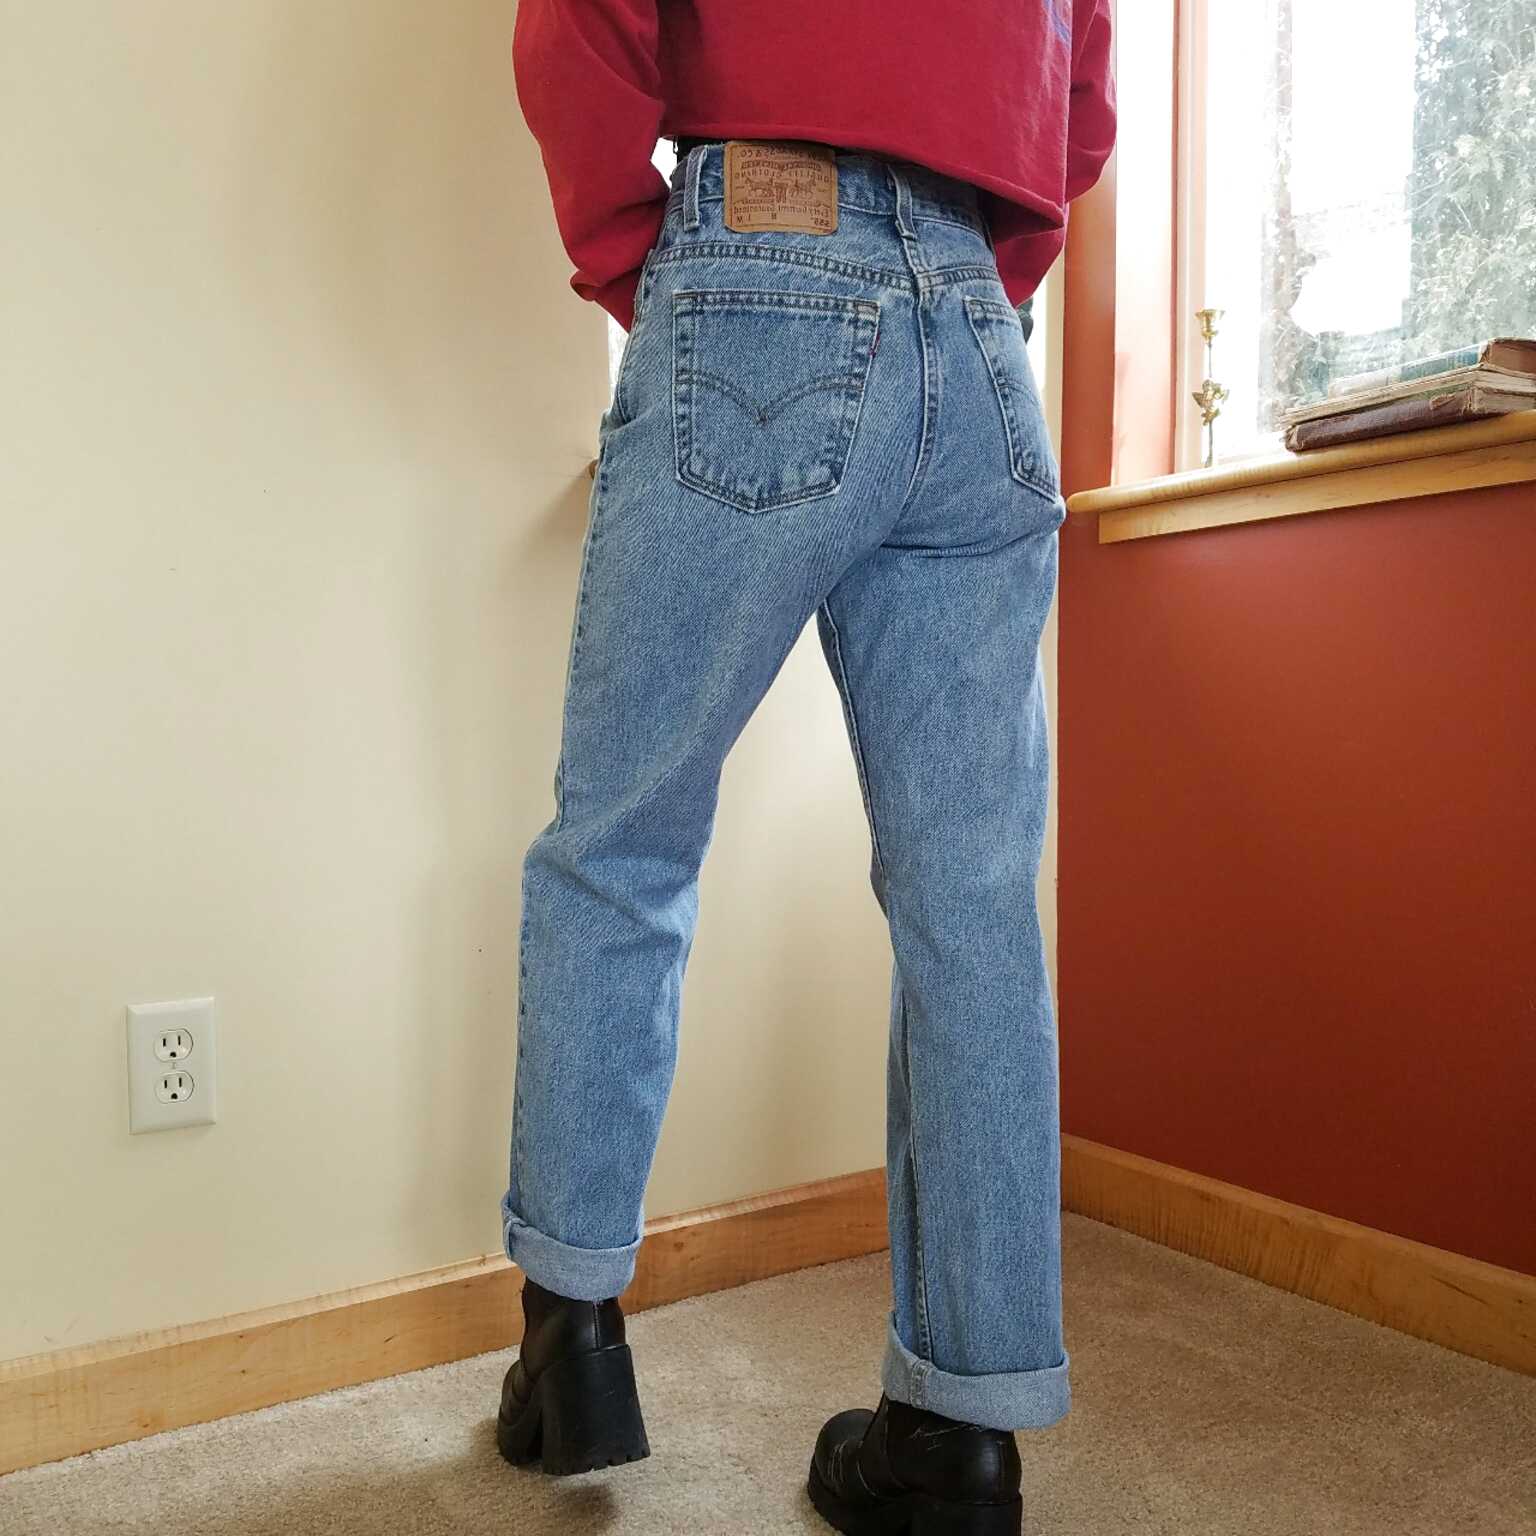 levis crossover jeans